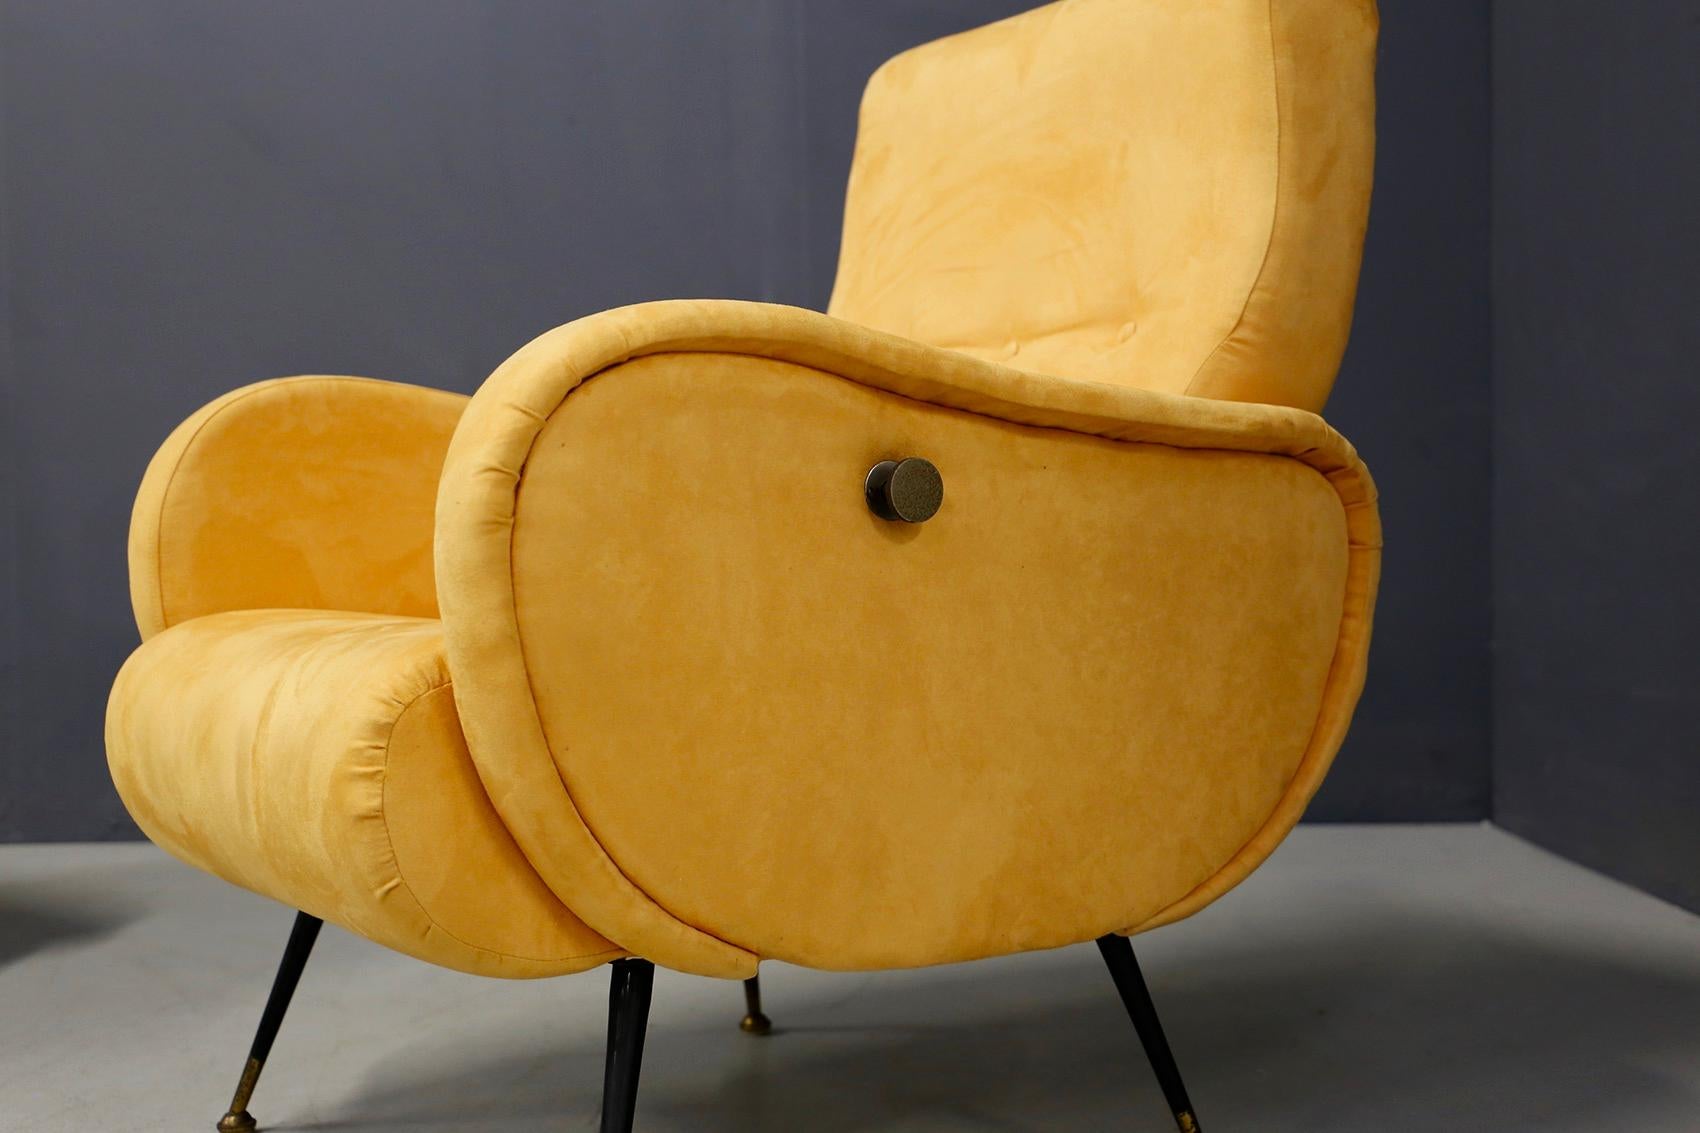 Pair of restored midcentury Italian armchairs from 1950. The armchairs are lined in yellow velvet. The particularity of the seats is their mechanism that makes the armchair reclining. Its mechanism is operated by a brass knob positioned on the sides